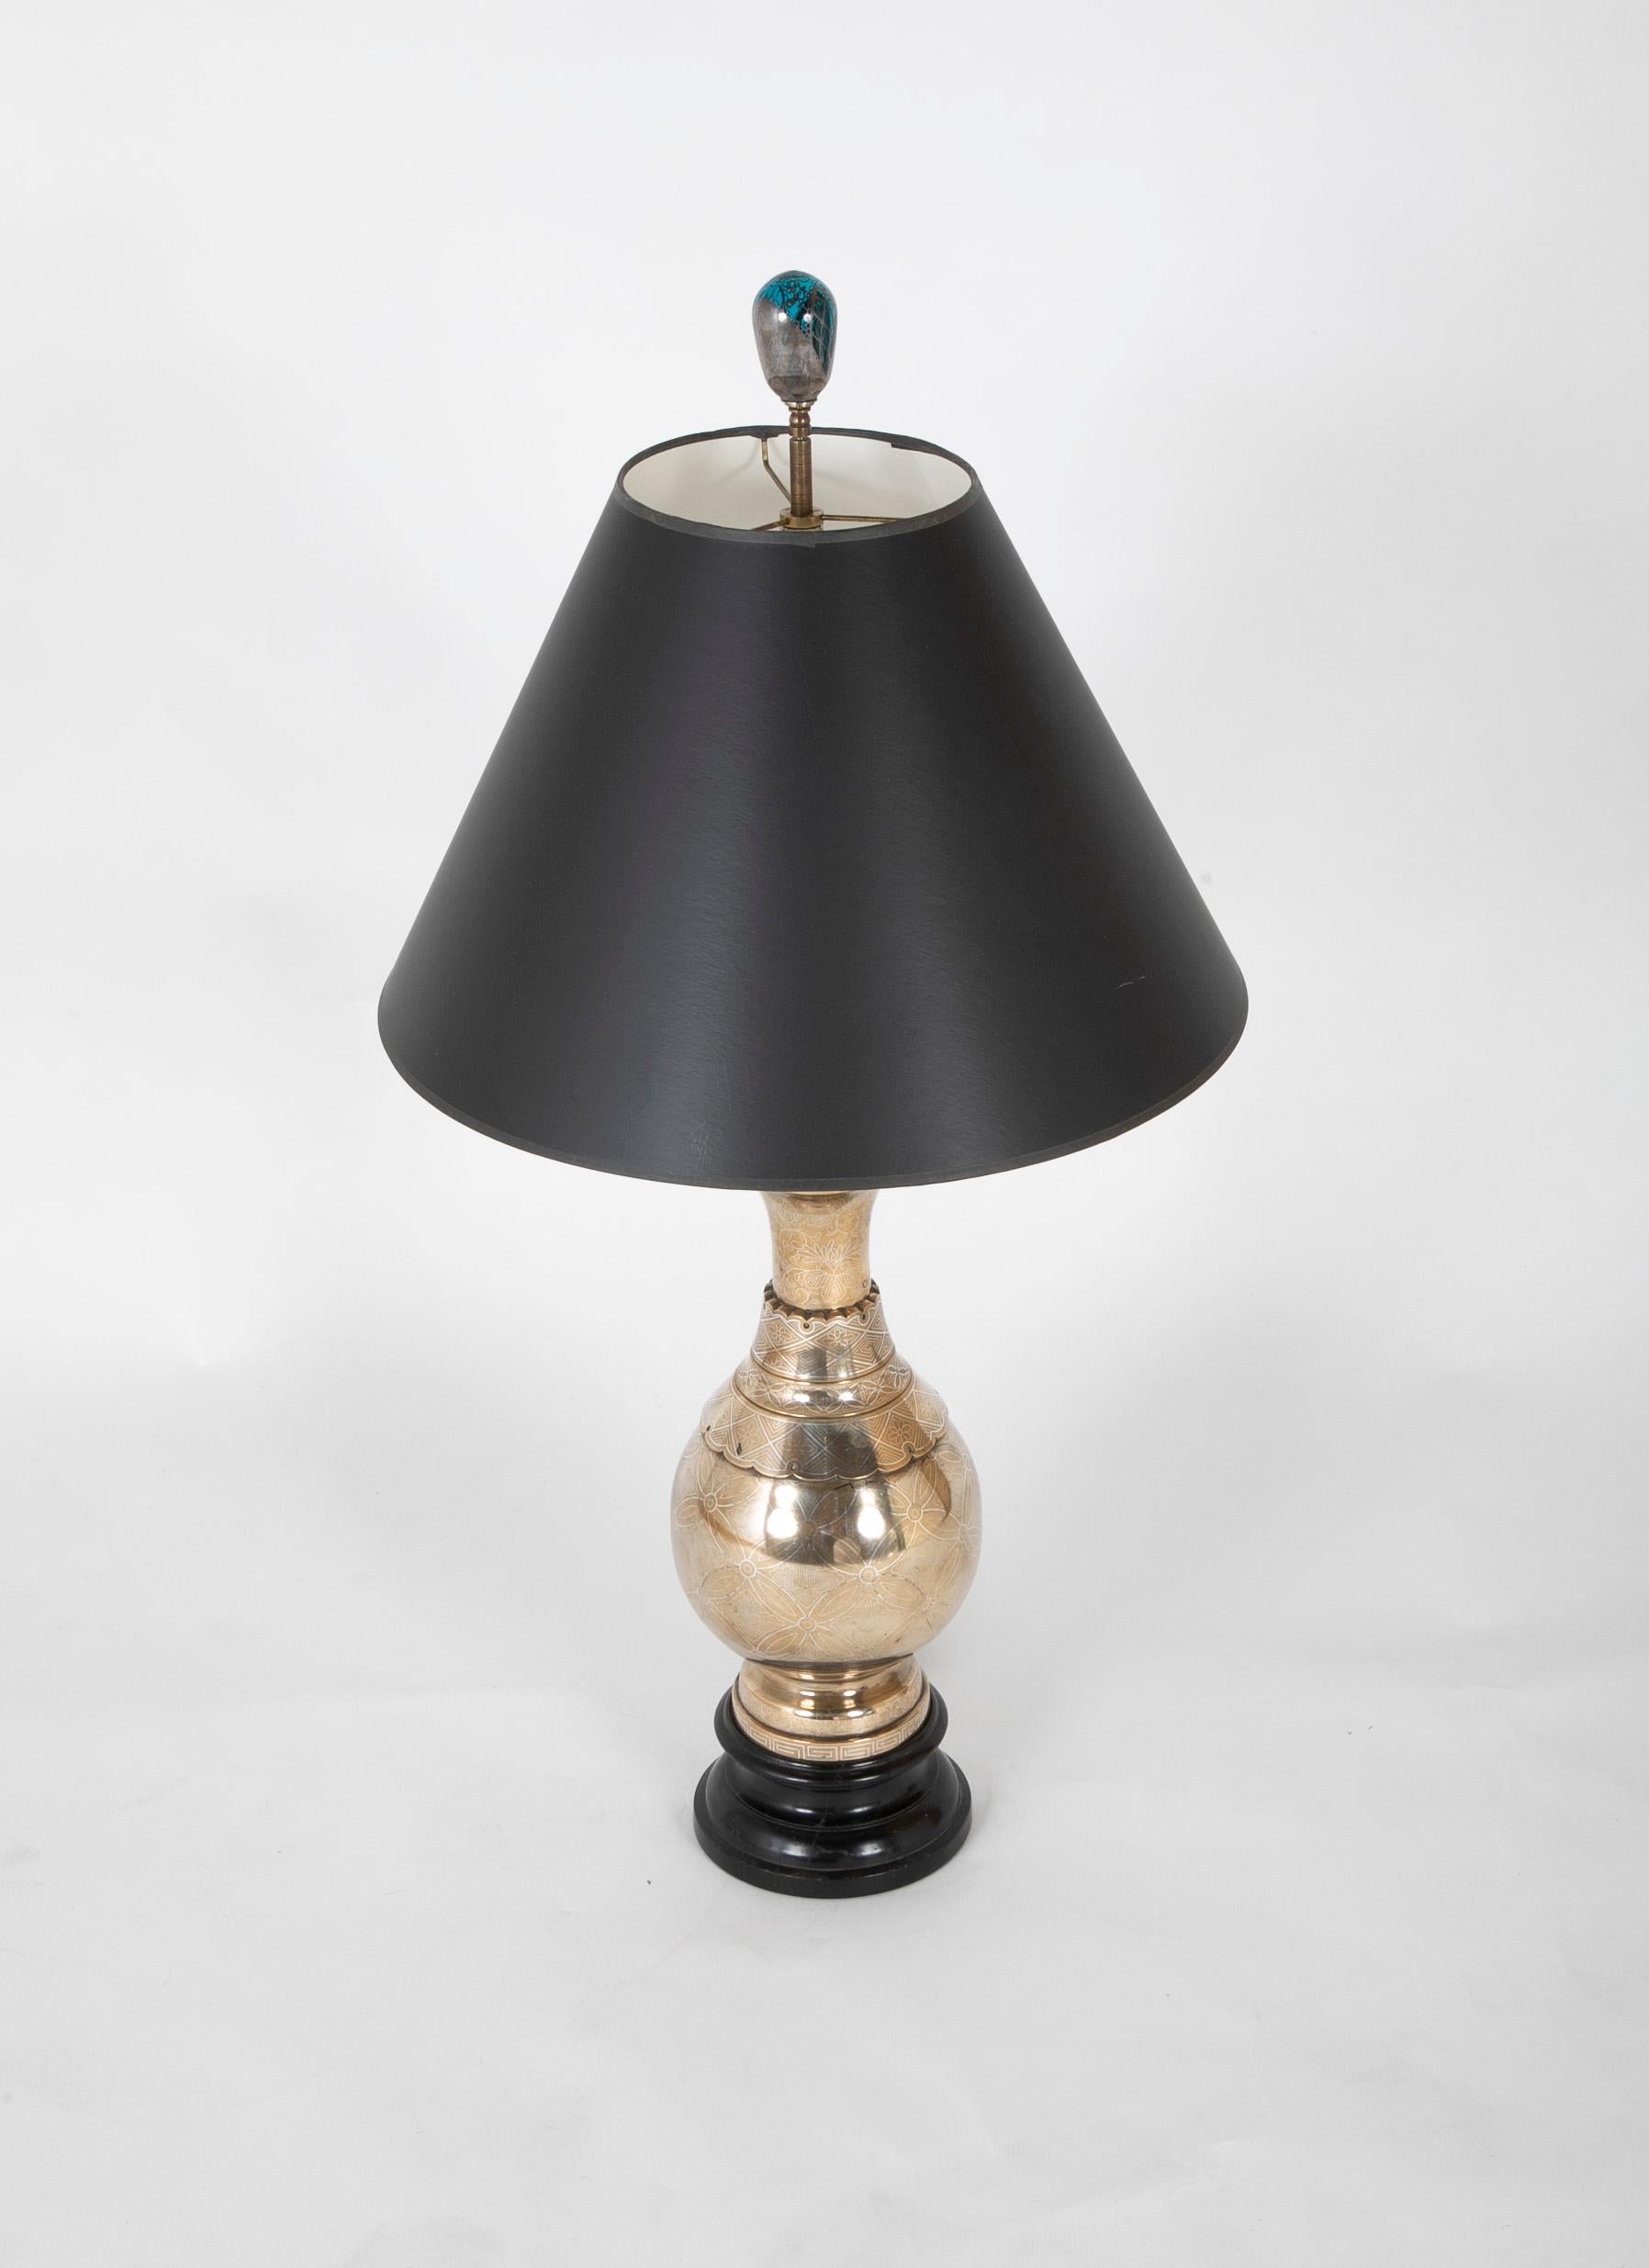 The bronze urn with delicate floral and 'Greek key' silver inlay covering the surface, mounted on a ebonized wooden socle base. Made with superior craftsmanship, the profile of this lamp is exquisite. The hand-blownn glass finial is included, the